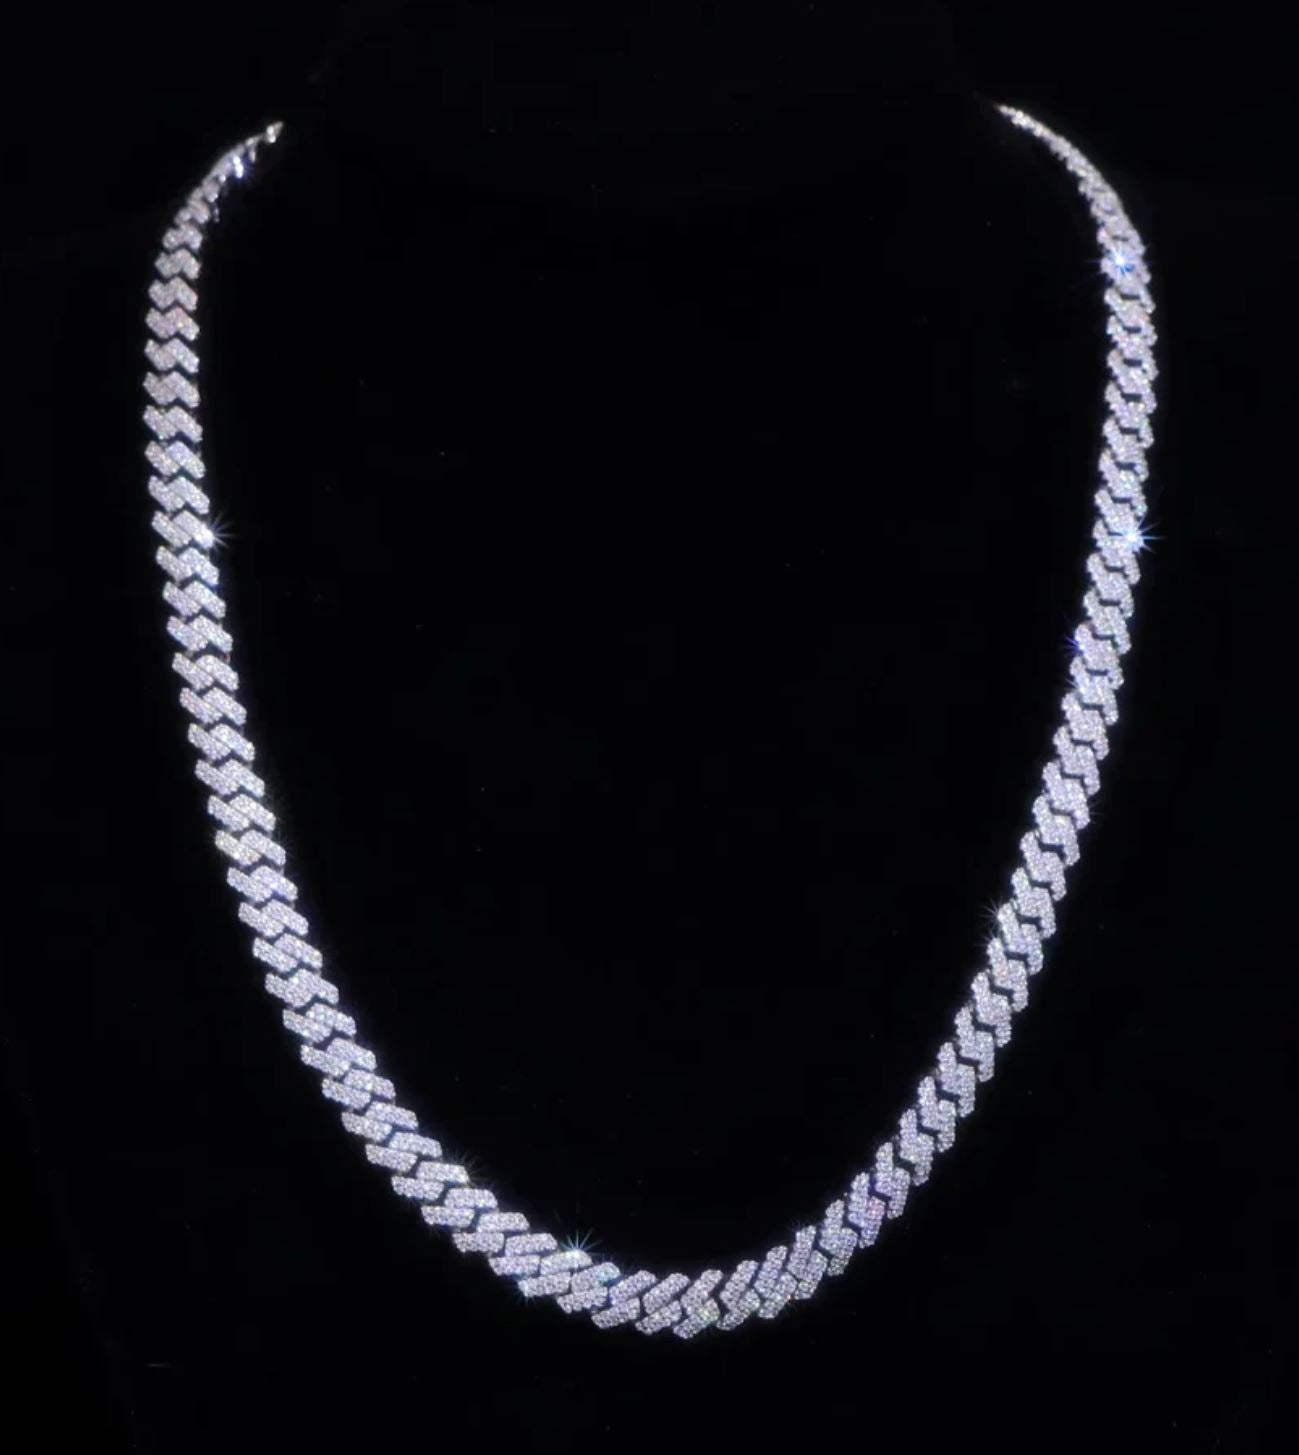 8mm-unisex-s-link-chain-moissanite-s925-available